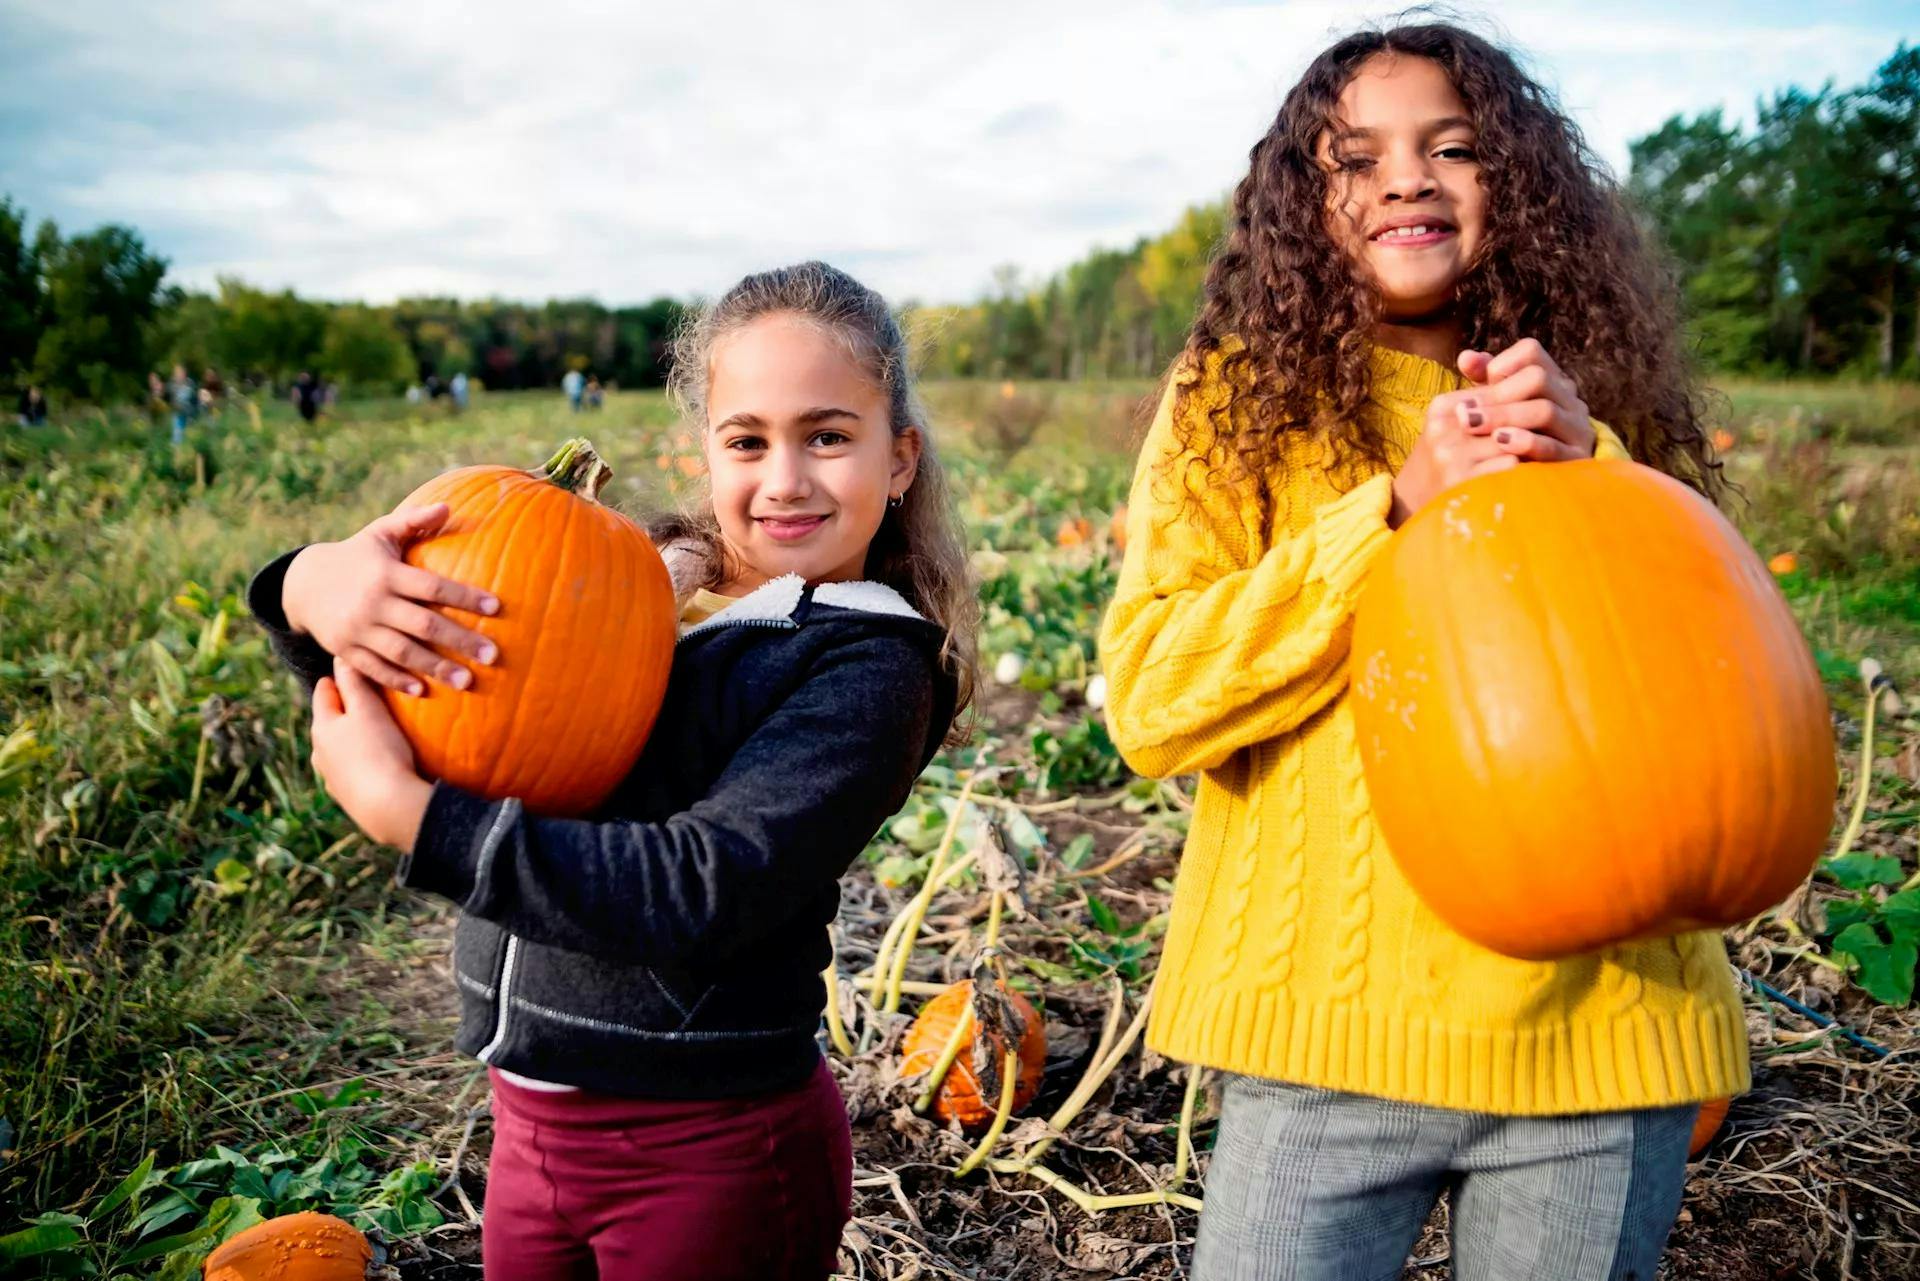 Celebrate fall with nutritious fruits and veggies